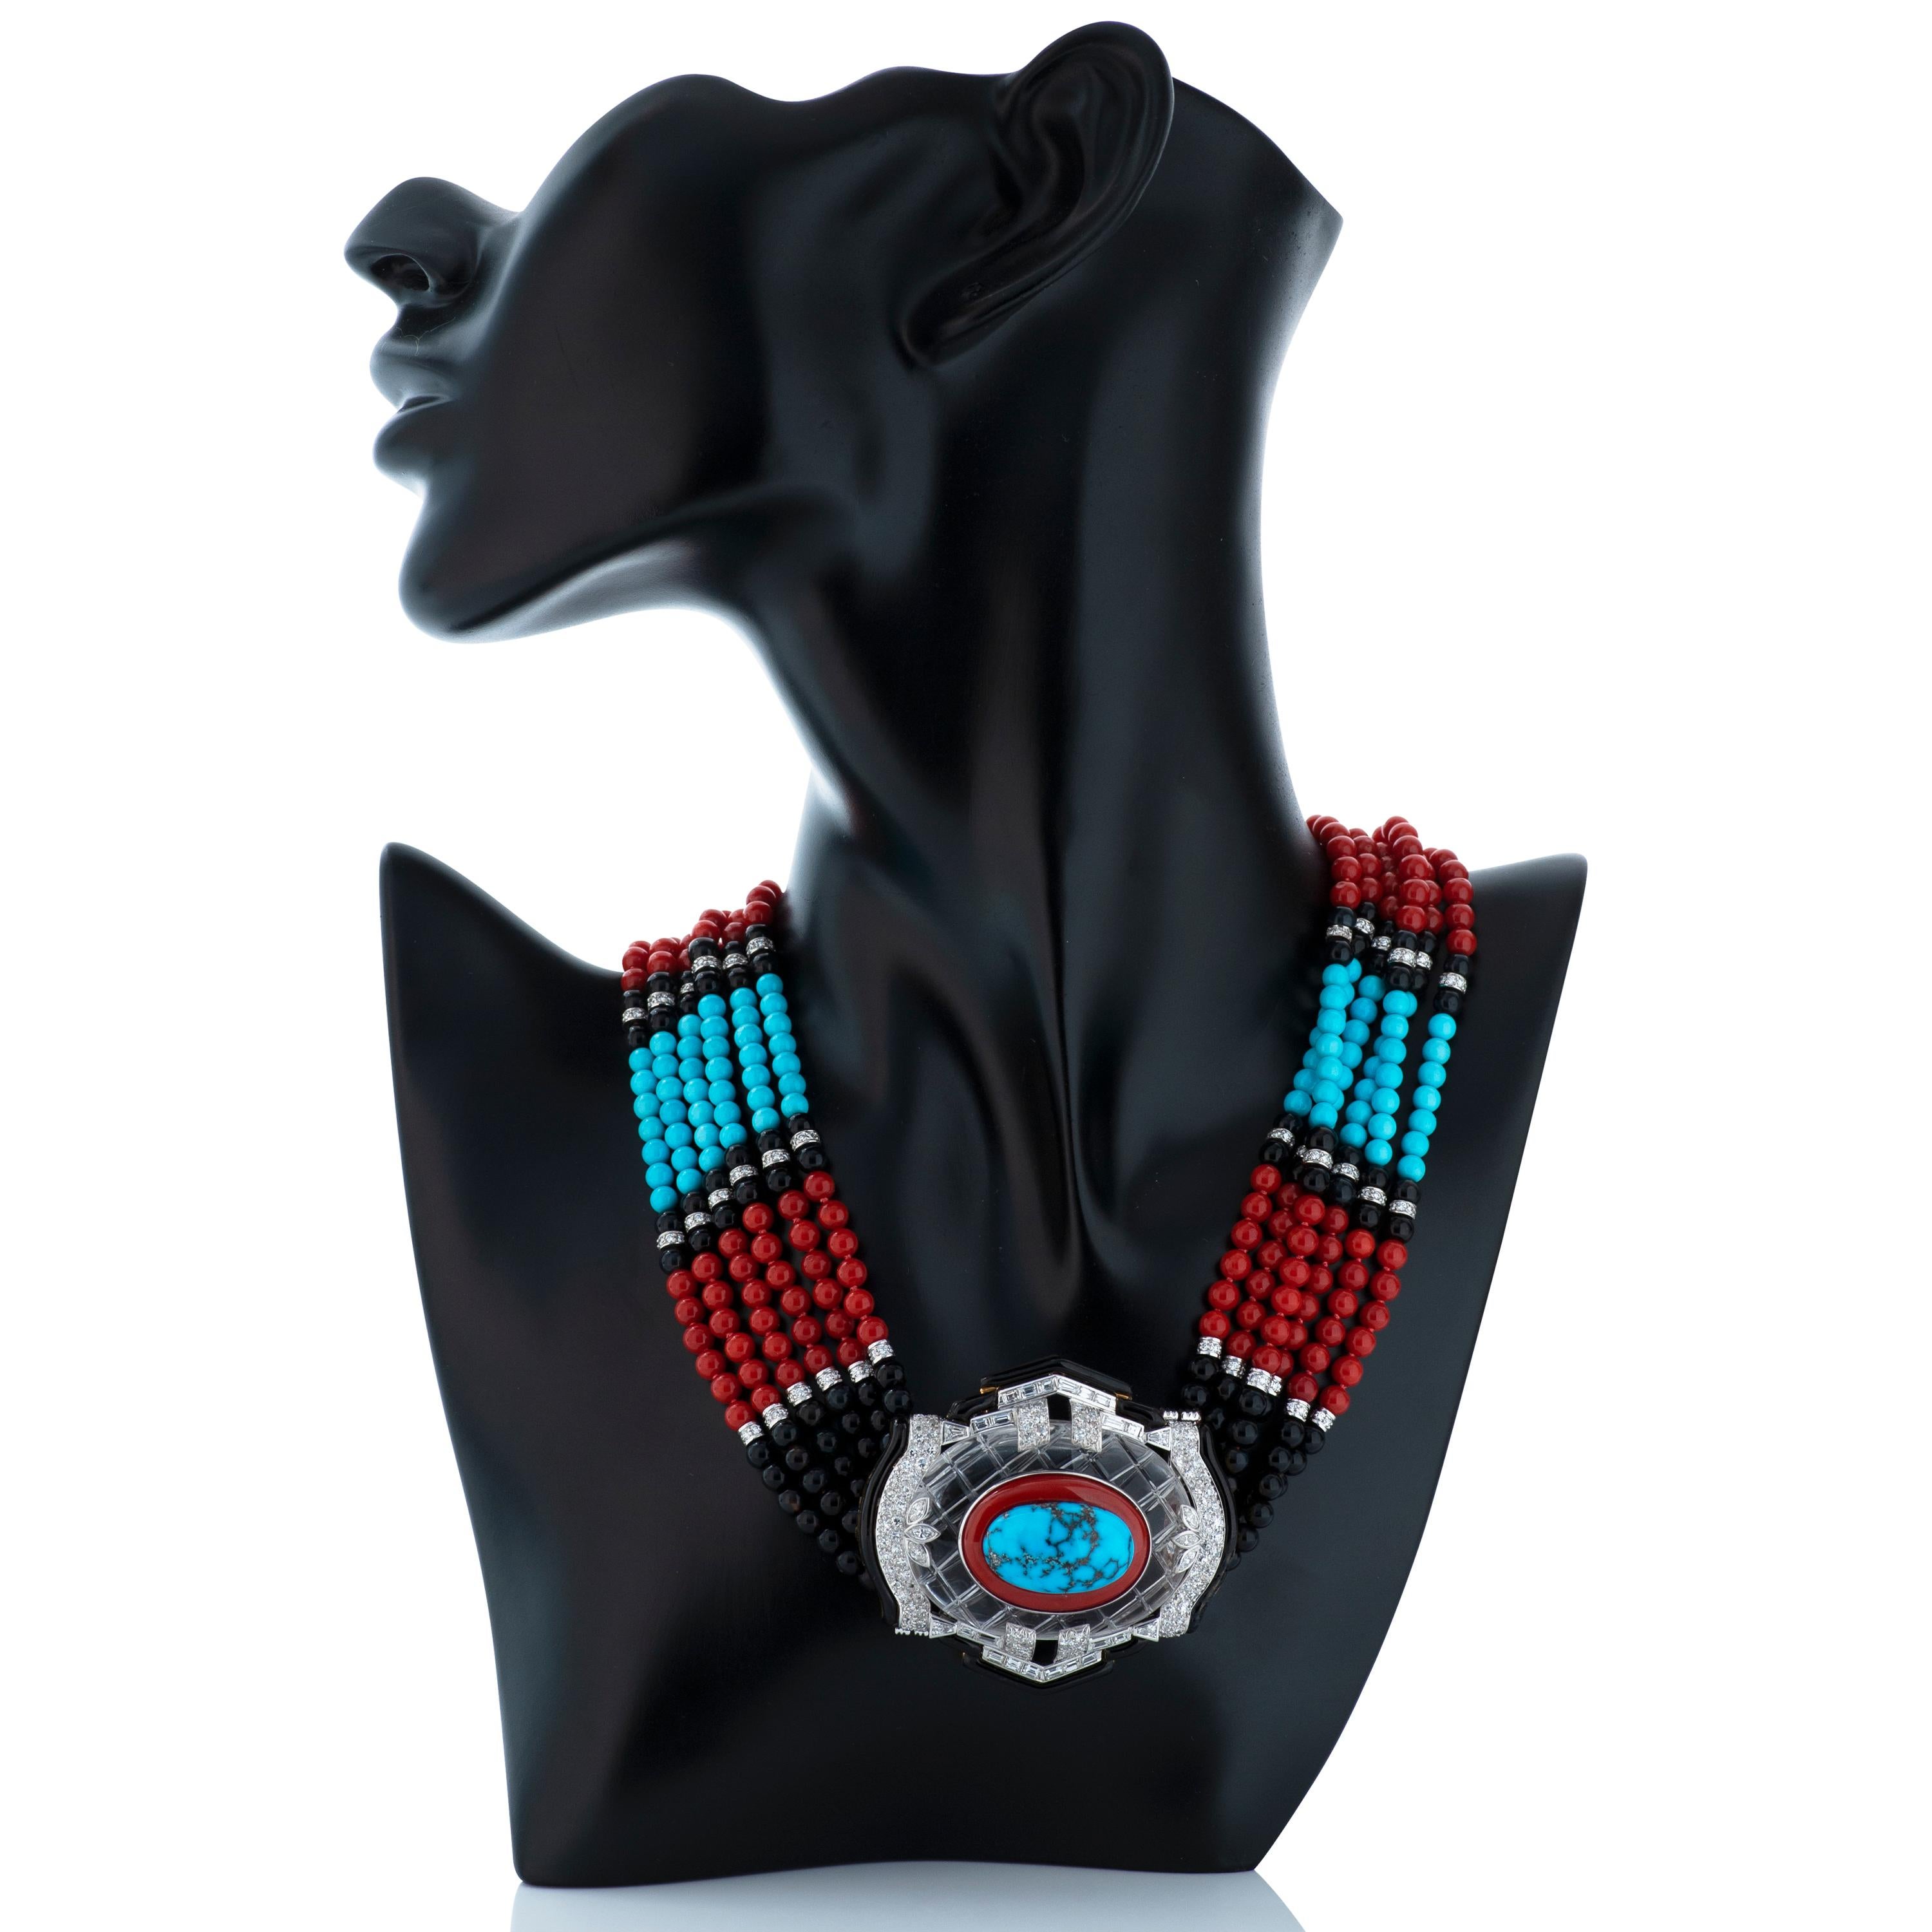 David Webb multi-strand necklace featuring cabochon turquoise, carved rock crystal, coral, turquoise and onyx beads, approximately 3.17 carats of round brilliant-cut diamonds and black enamel, set in 18k gold and platinum.  

Fits up to a 16